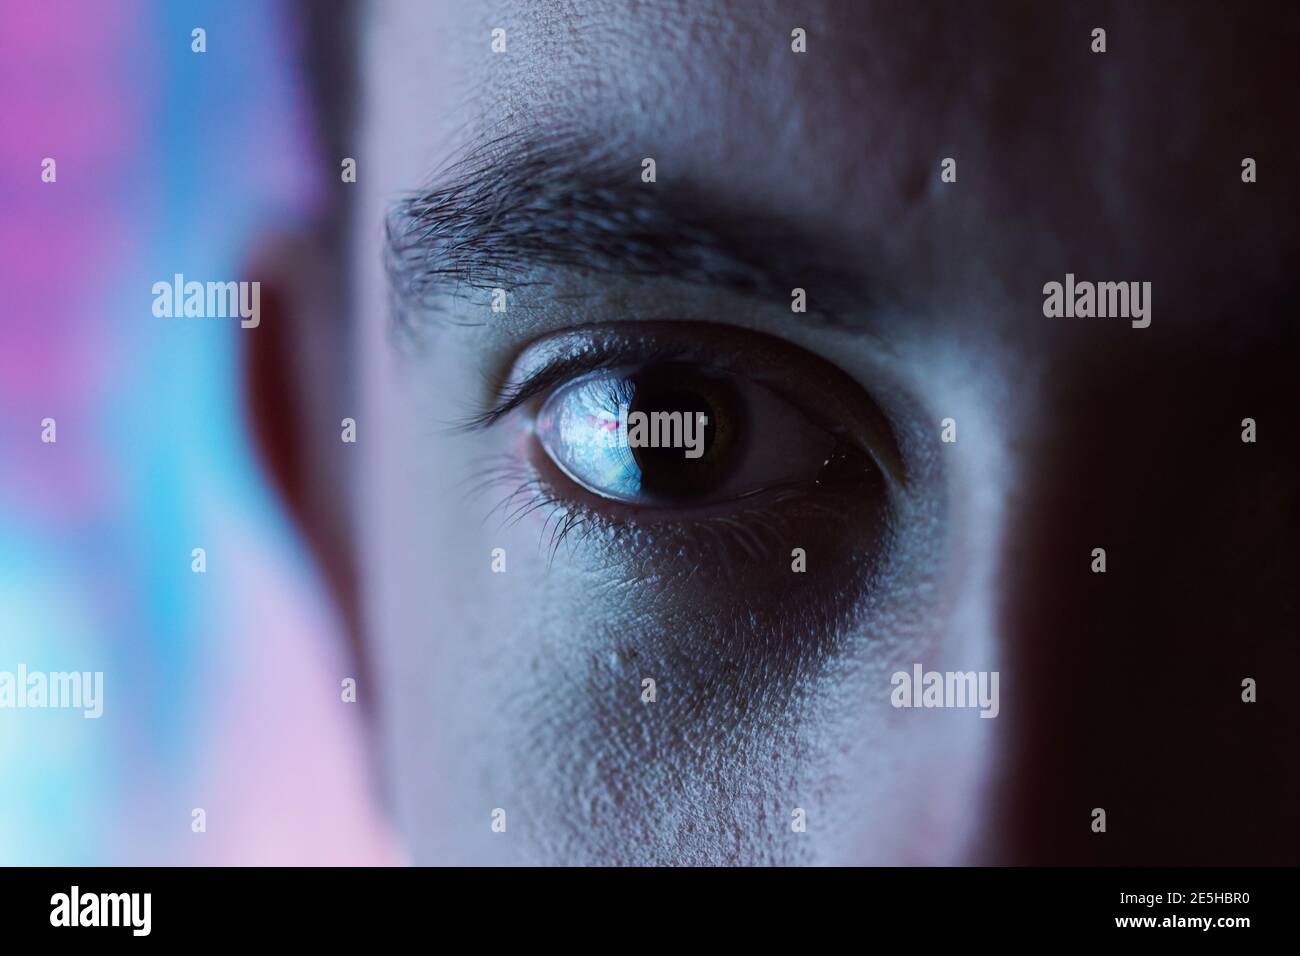 Expressive look - closeup of an eye with blurred blue and pink neon light background and high contrast Stock Photo